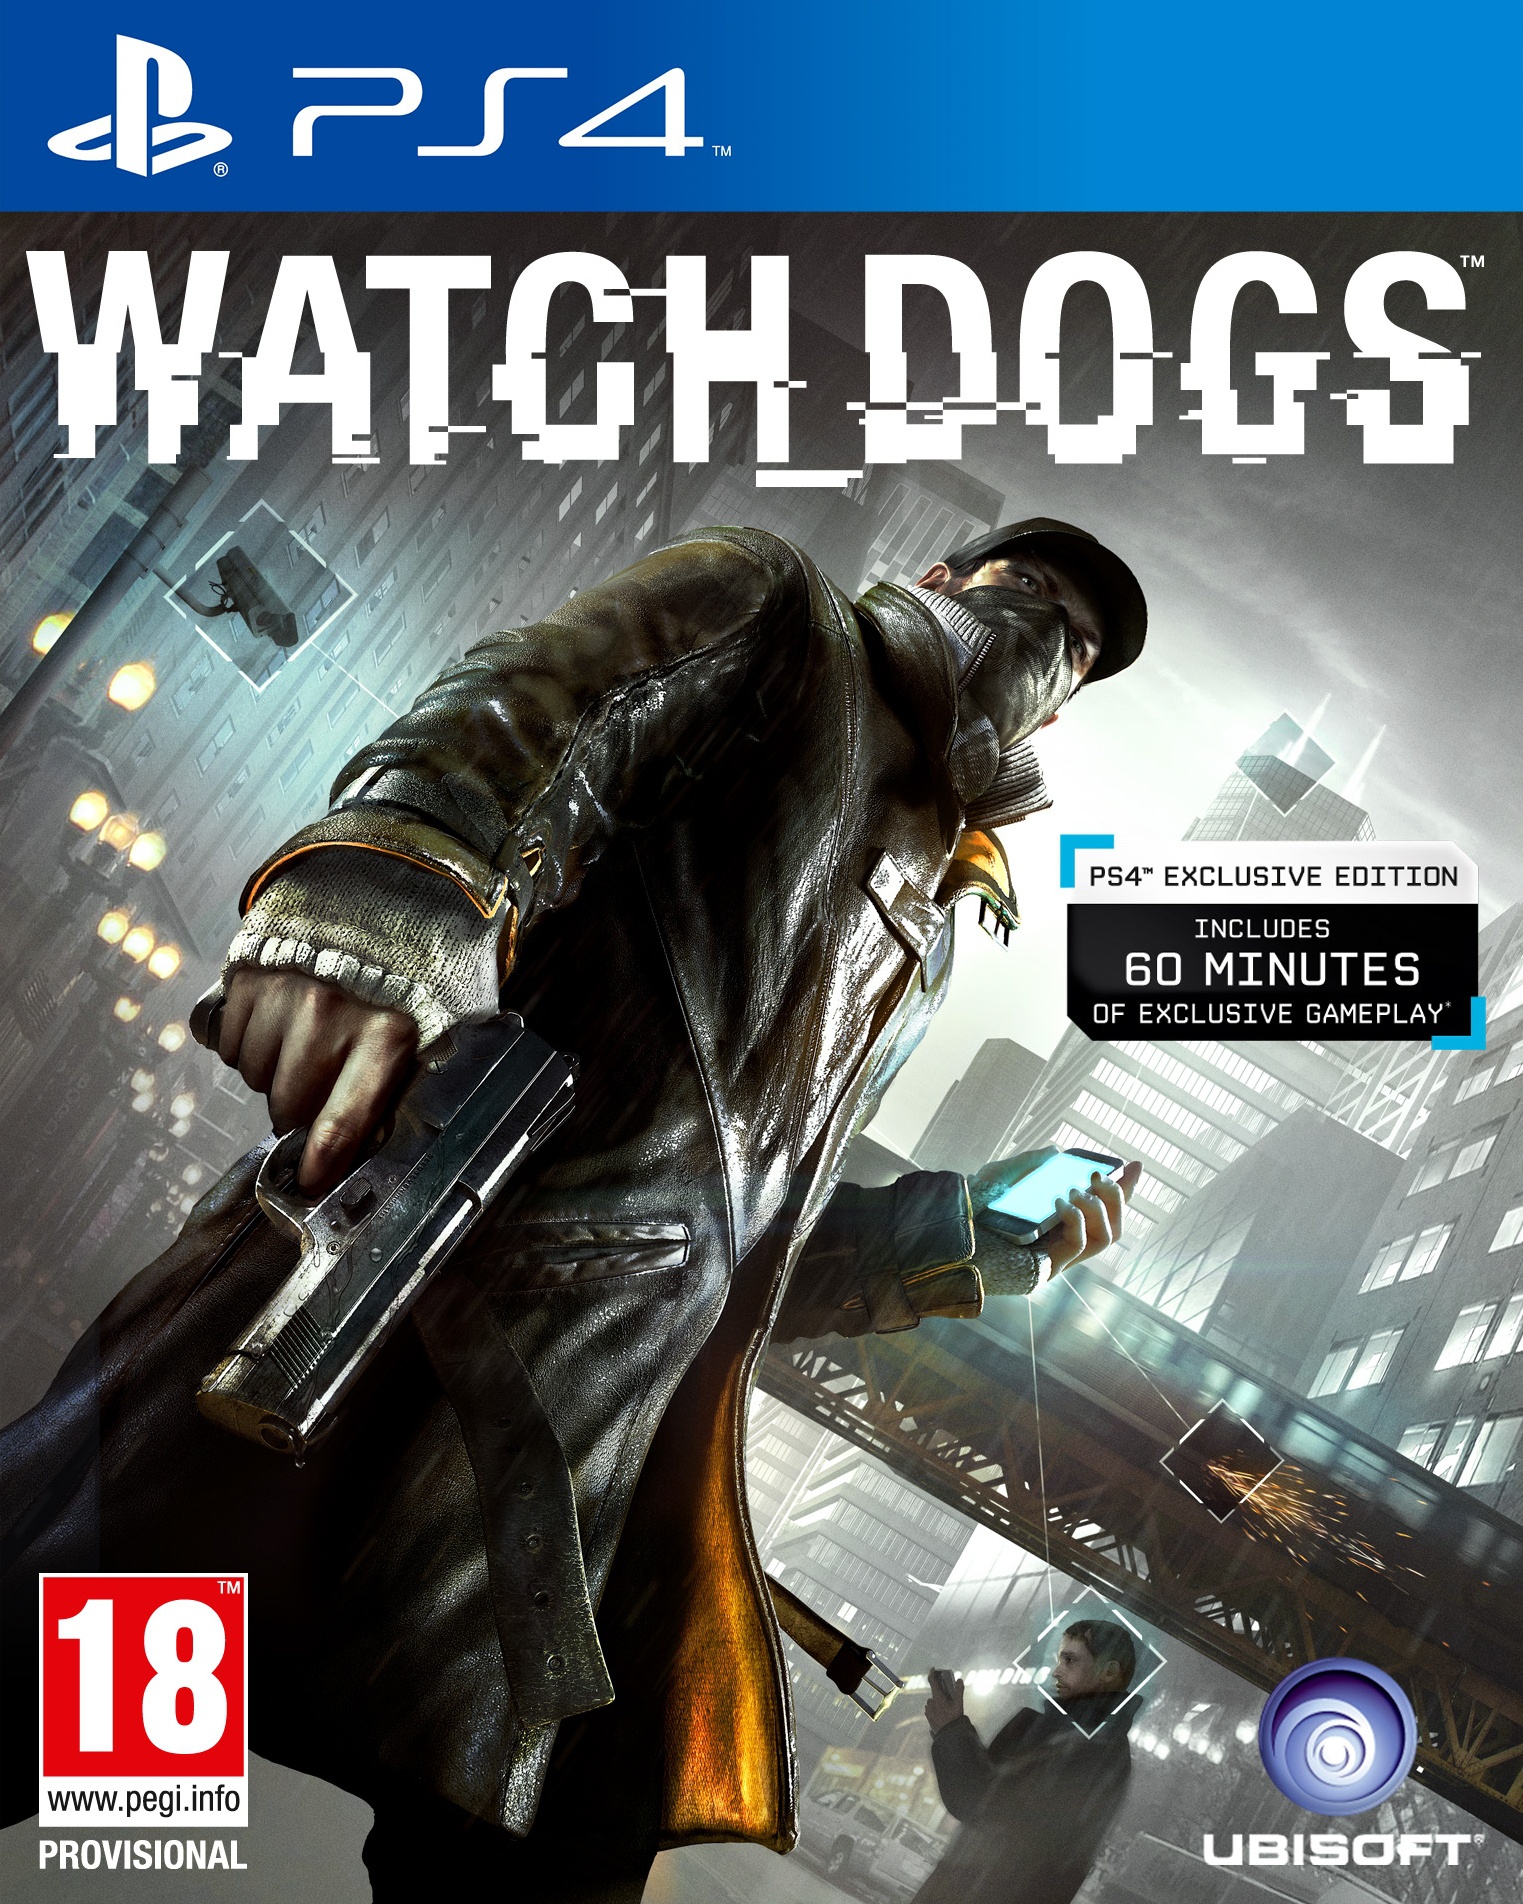 Watch Dogs - Complete Edition [PS4] 5.05 / 6.72 / 7.02 [EUR] (2014) [Русский] (v1.00)